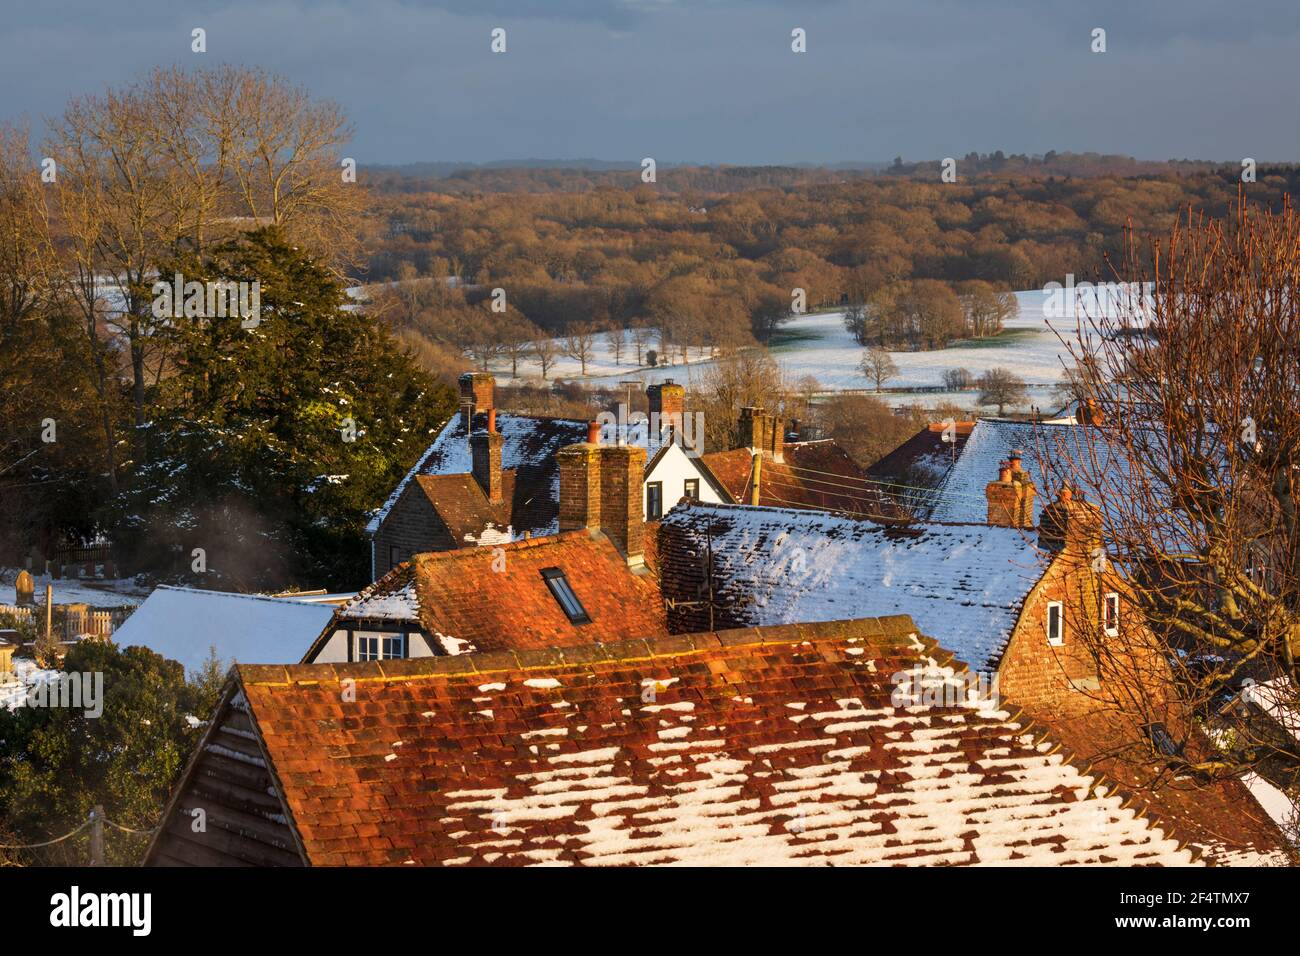 View over cottage rooftops and High Weald landscape in winter snow in late afternoon sunlight, Burwash, East Sussex, England, United Kingdom, Europe Stock Photo